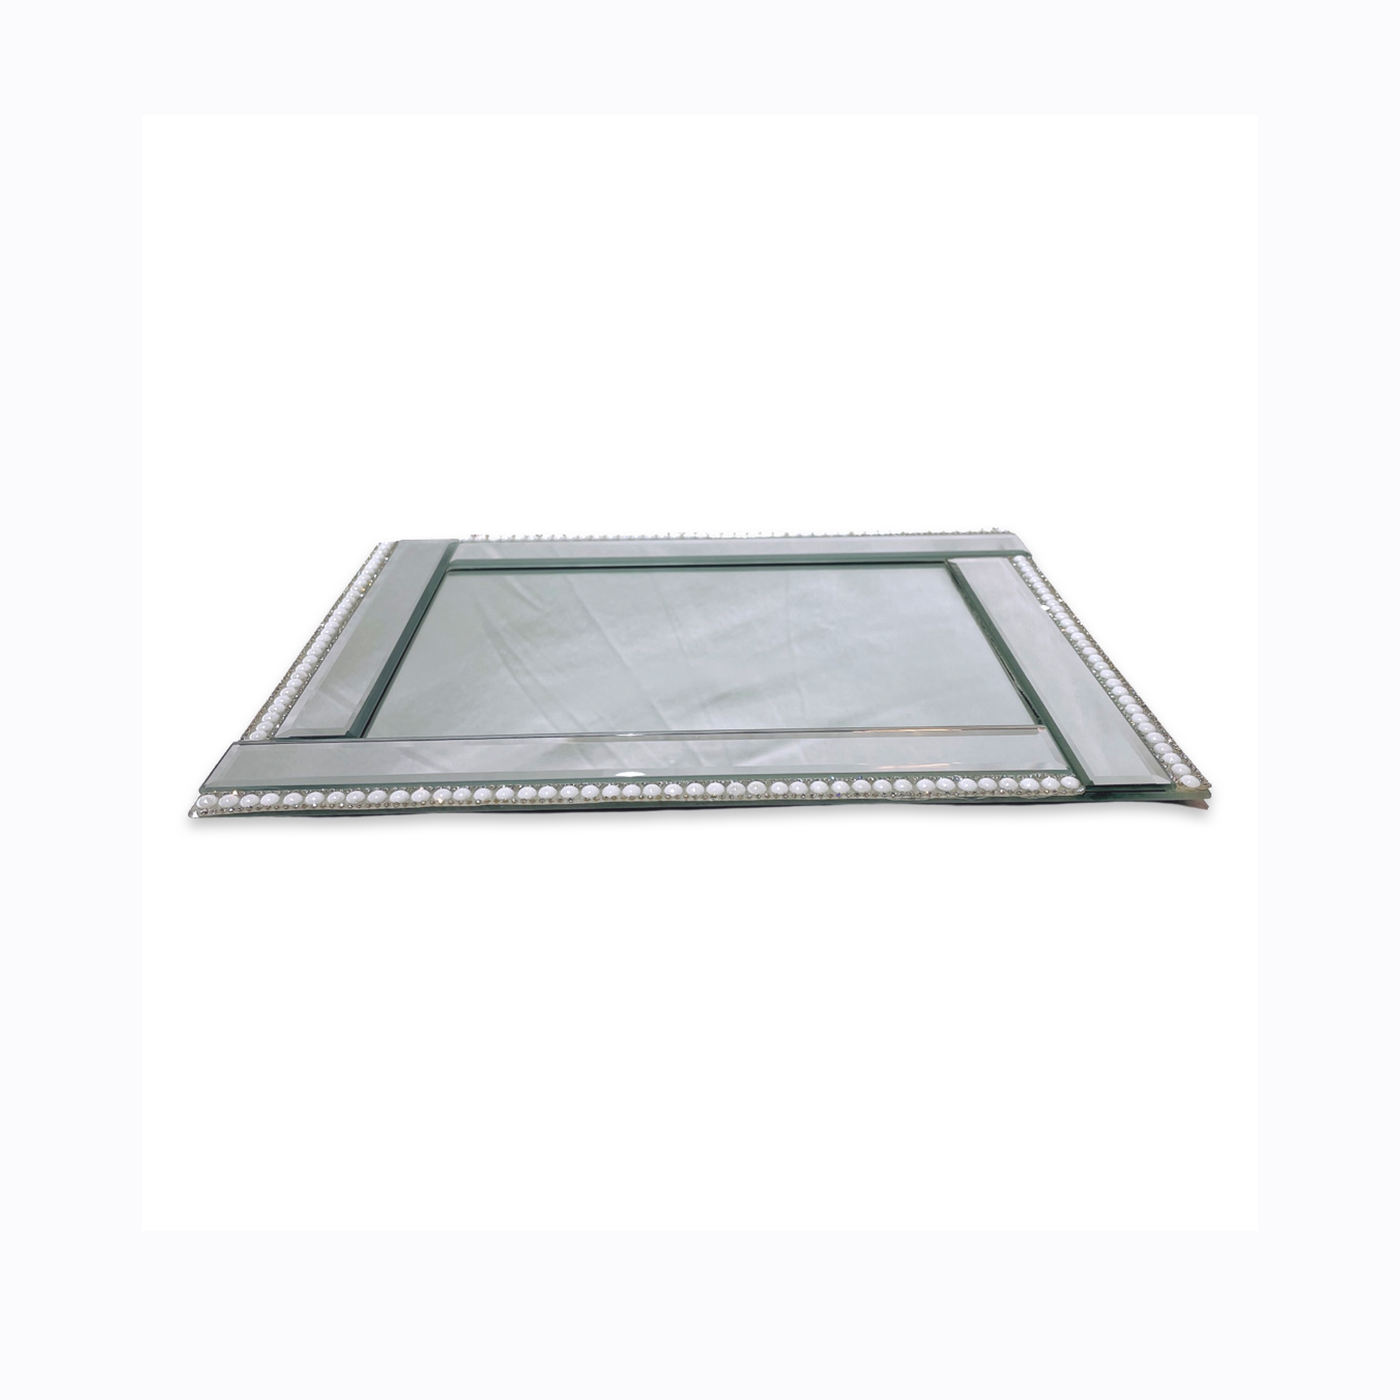 TY101 Mirrored Tray - Clear